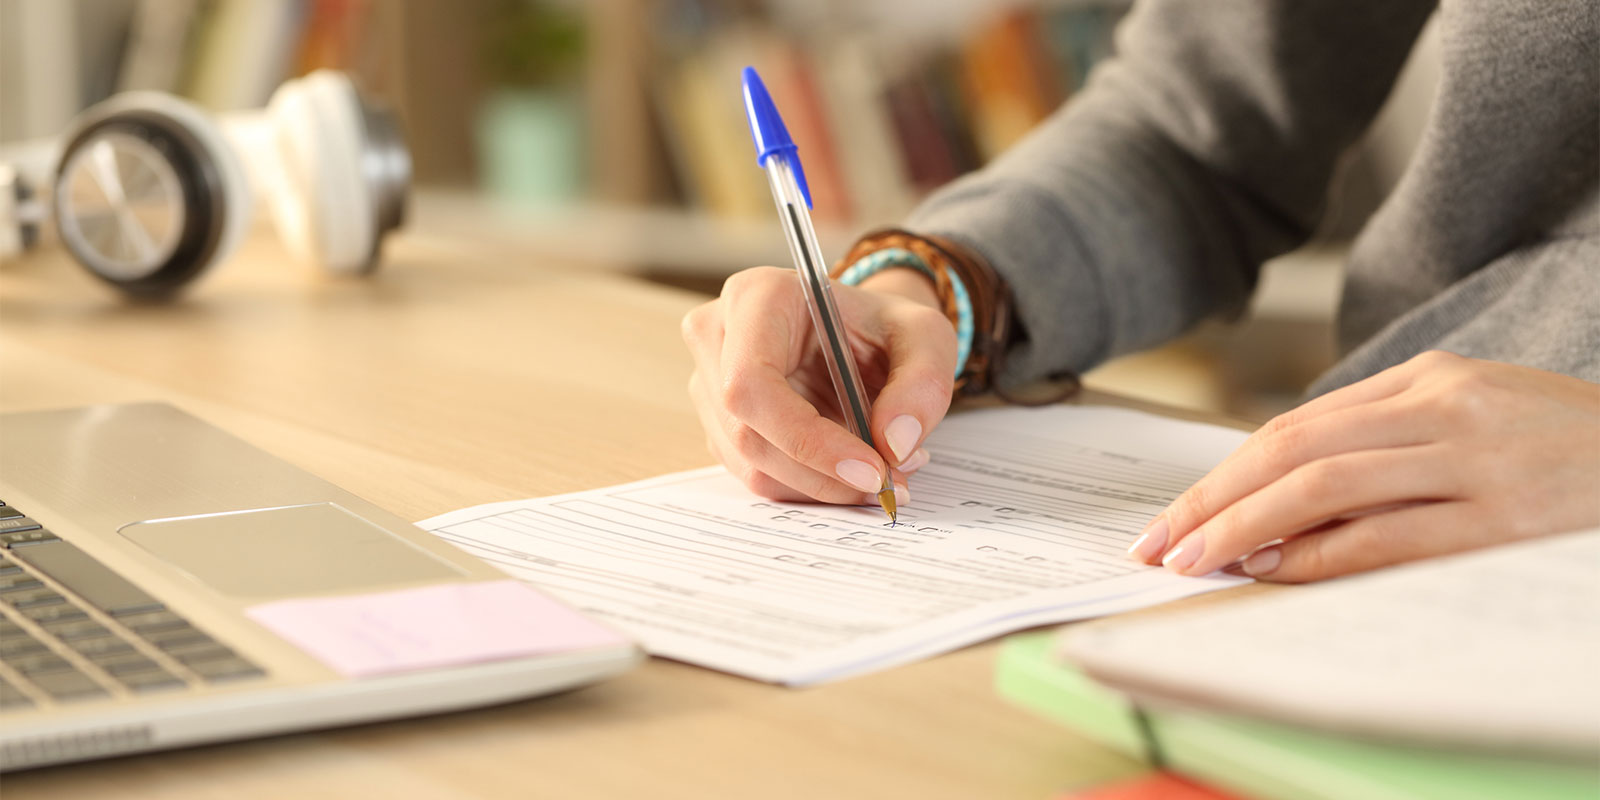 4 Items to Add to Your College Checklist